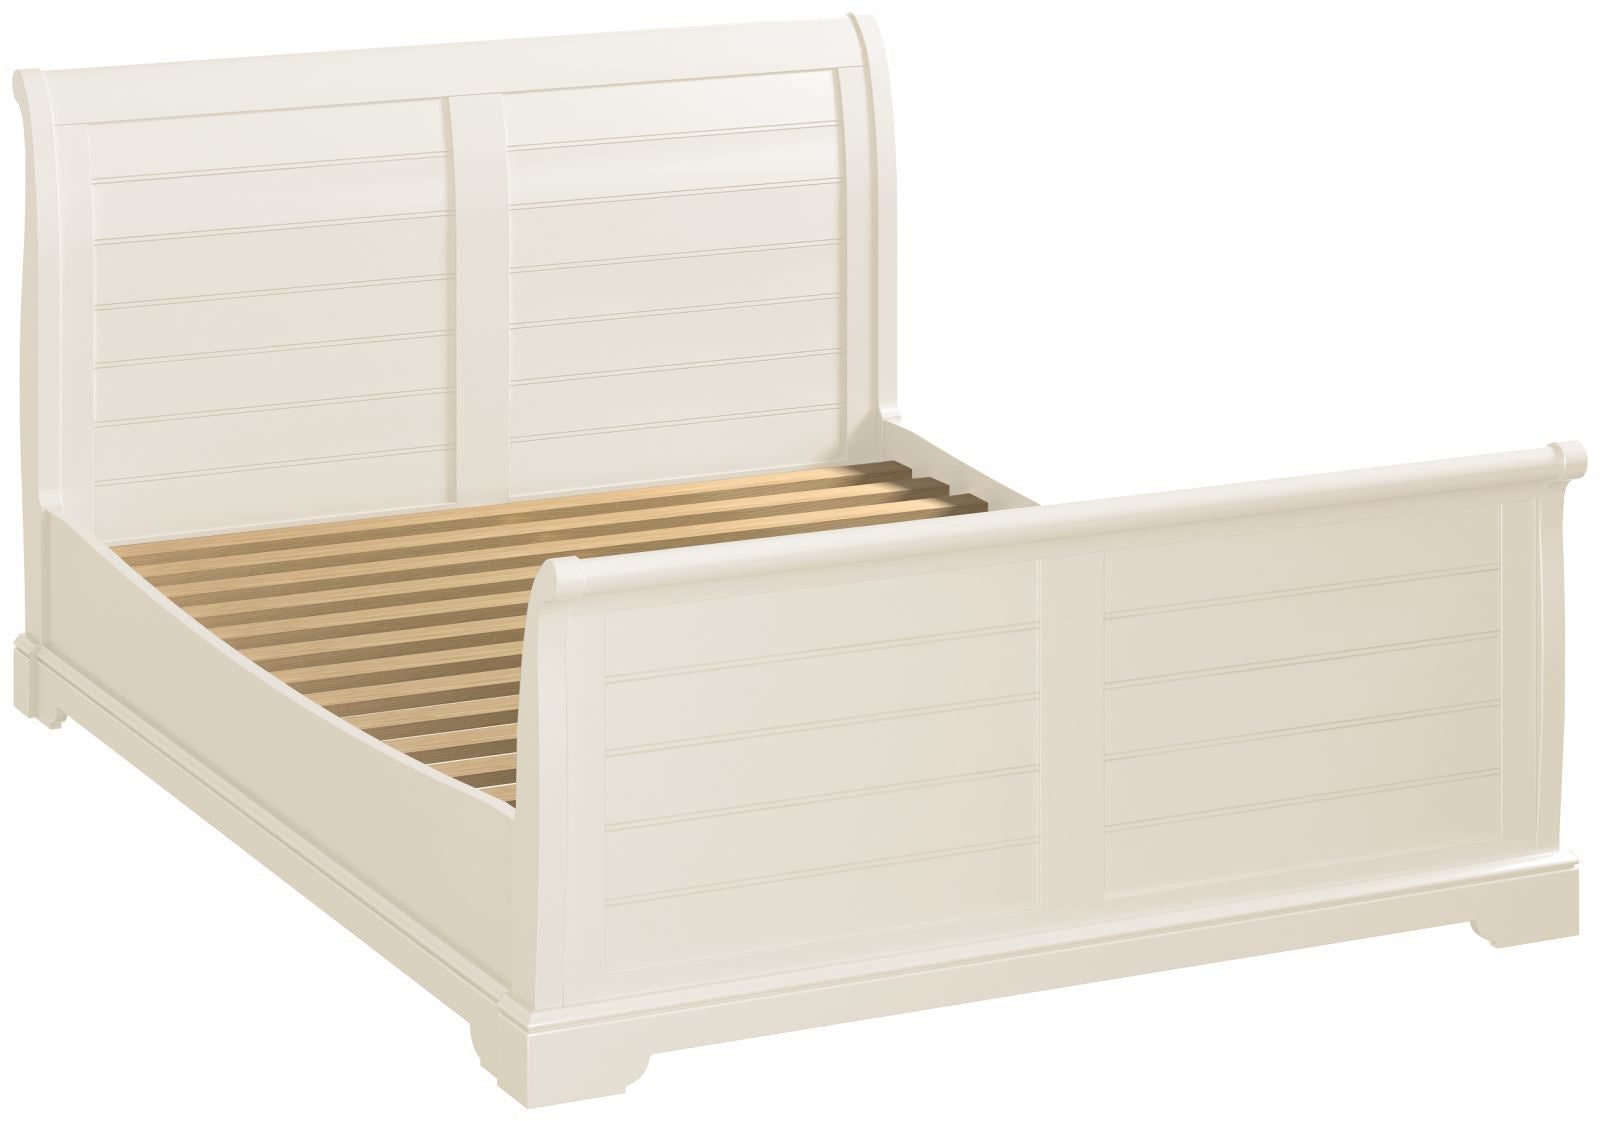 Lilibet Bed Double Size Sleigh